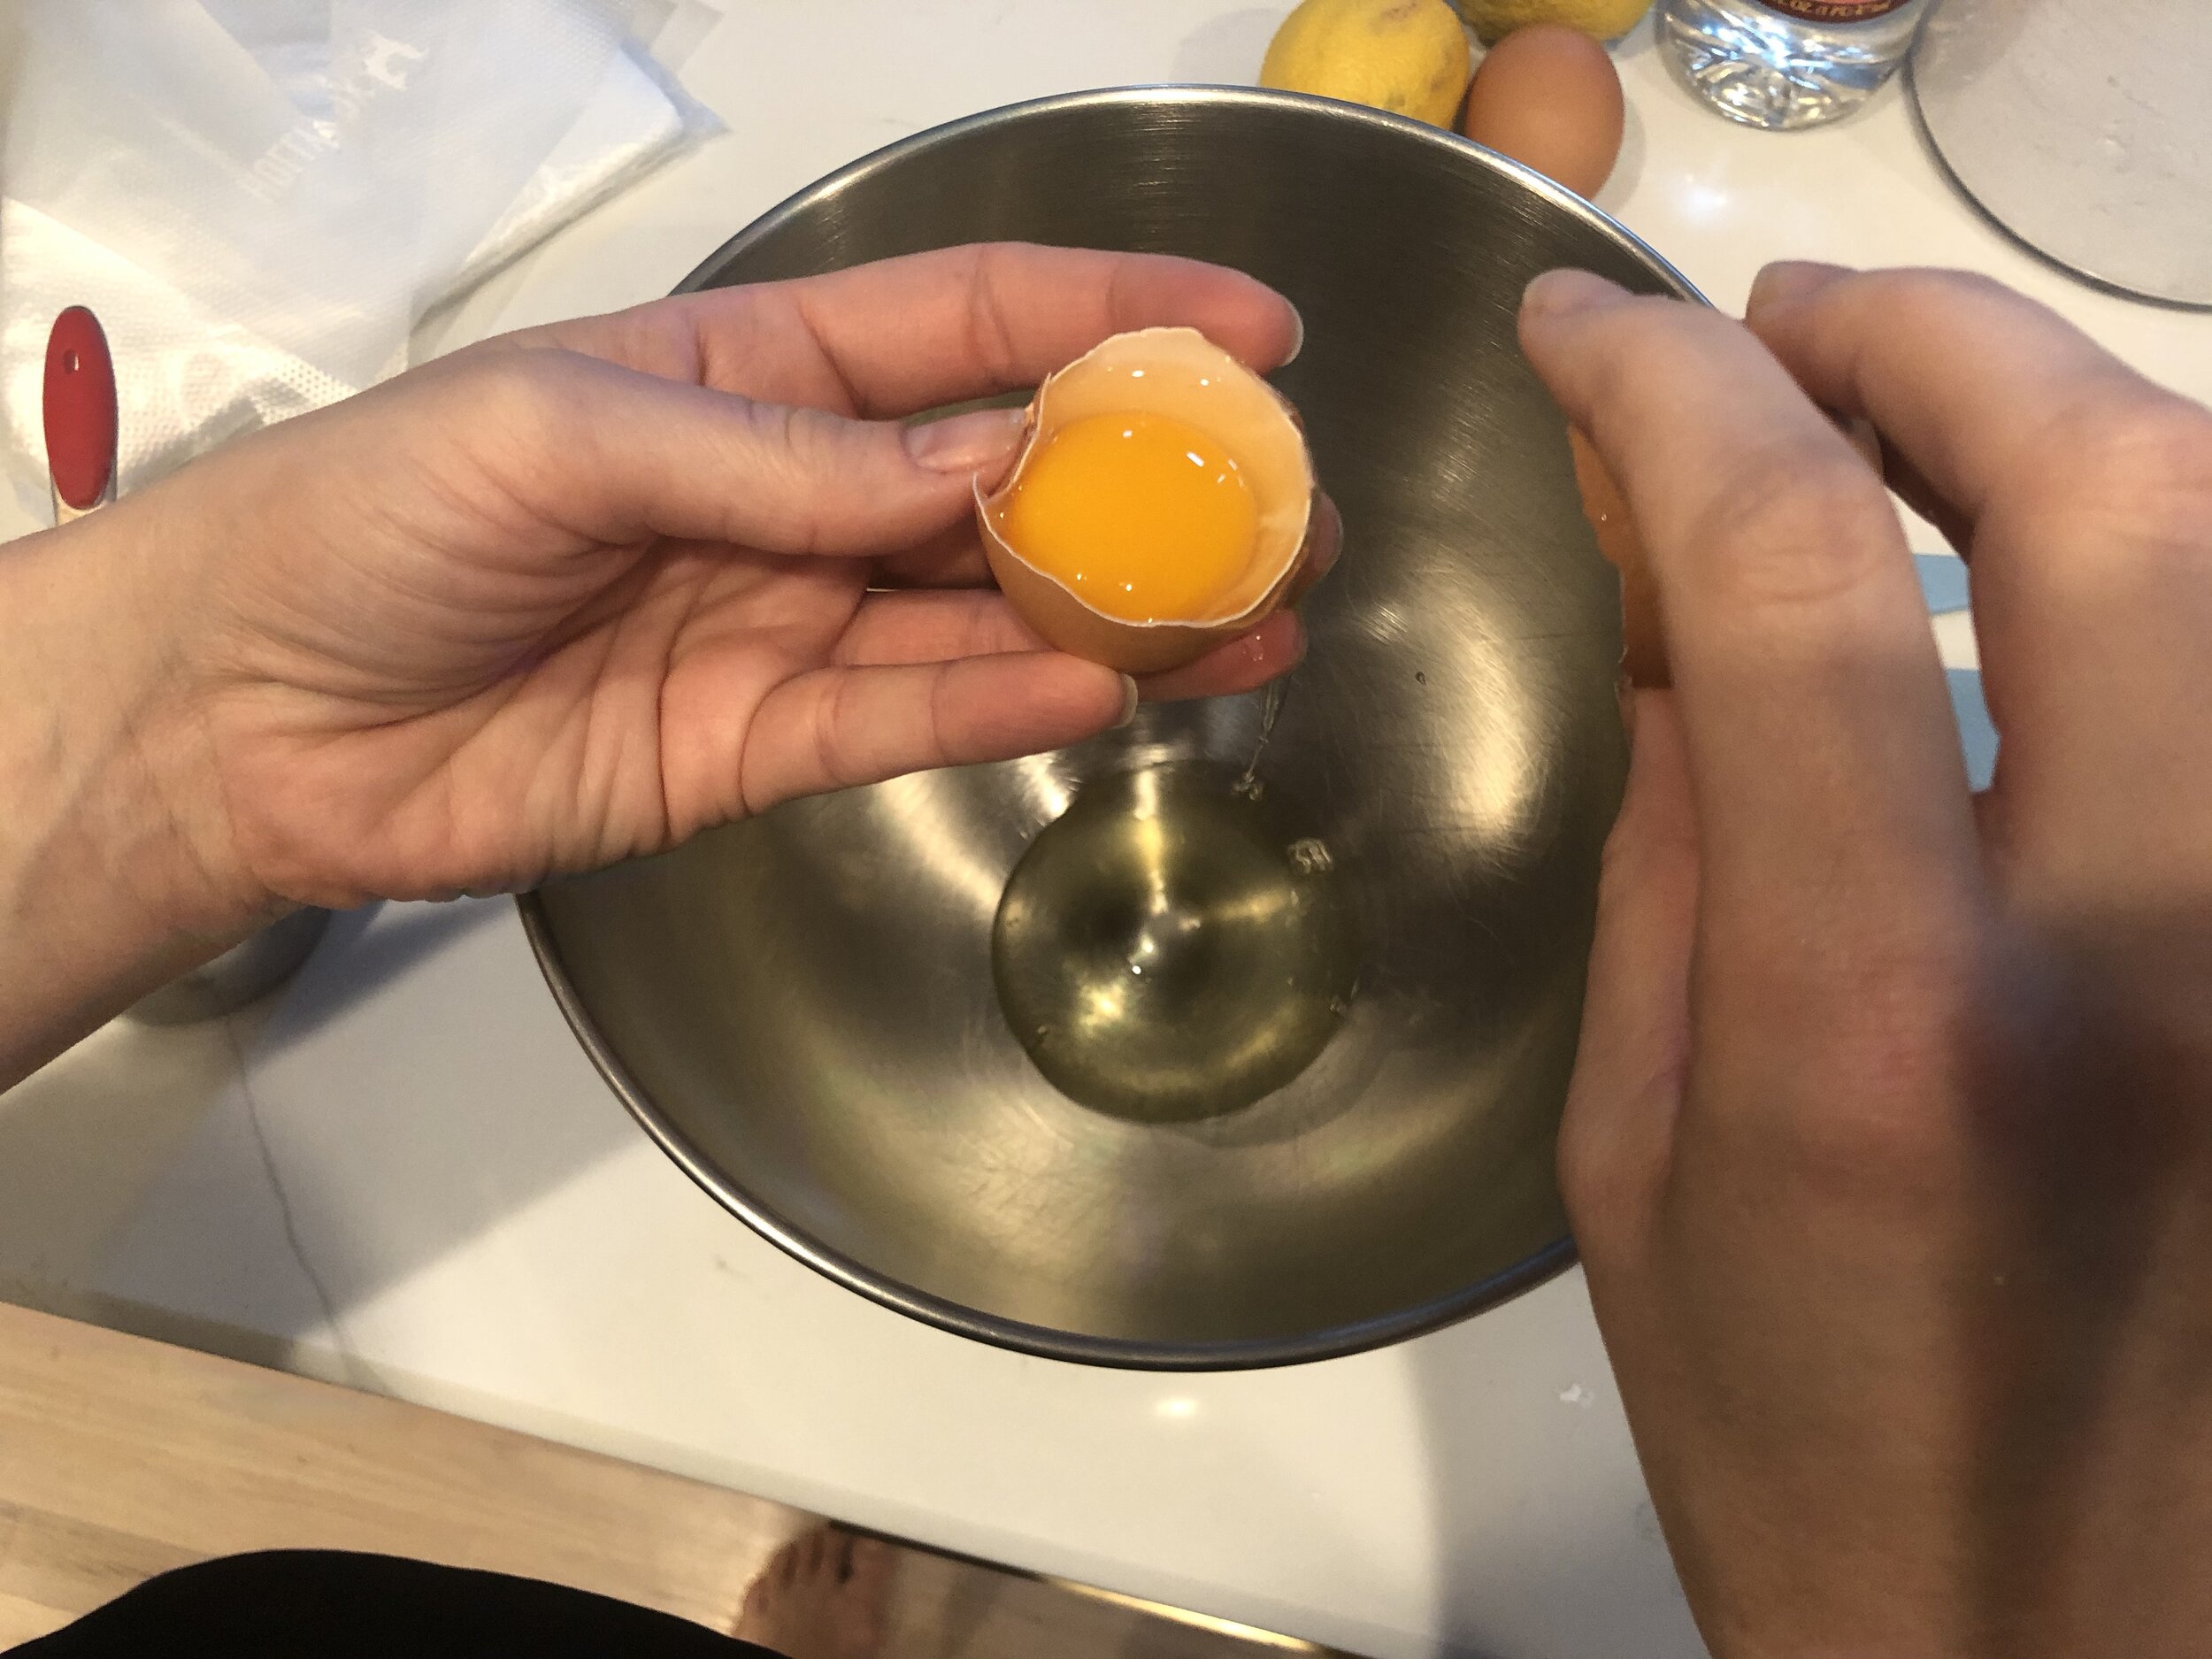  You can also use a tool or just your hands. The key is that NO YOLK get into the bowl. It will ruin the icing.  *Shoutout to my sweet husband for taking these egg separating pictures.  